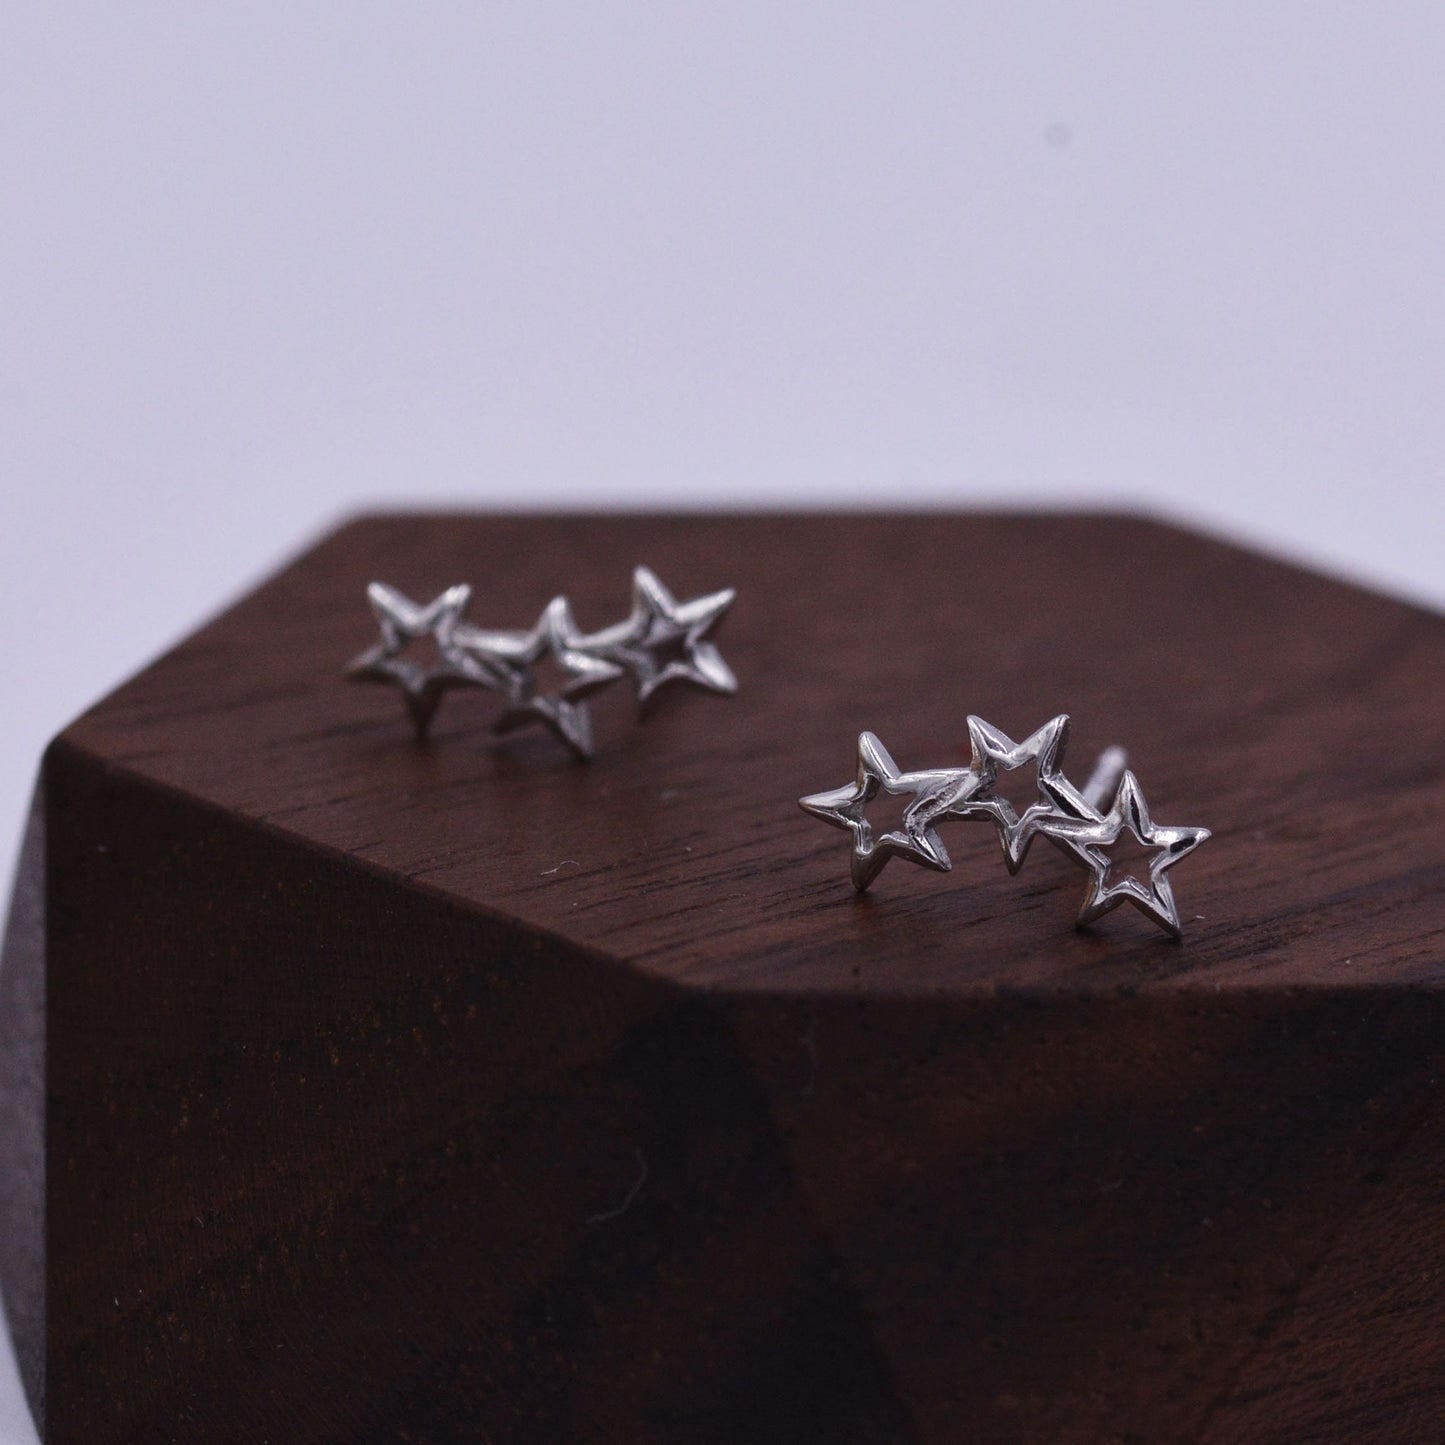 Tiny Open Star Trio Stud Earrings in Sterling Silver, Celestial Jewellery with Star Motif, Delicate and Stylish